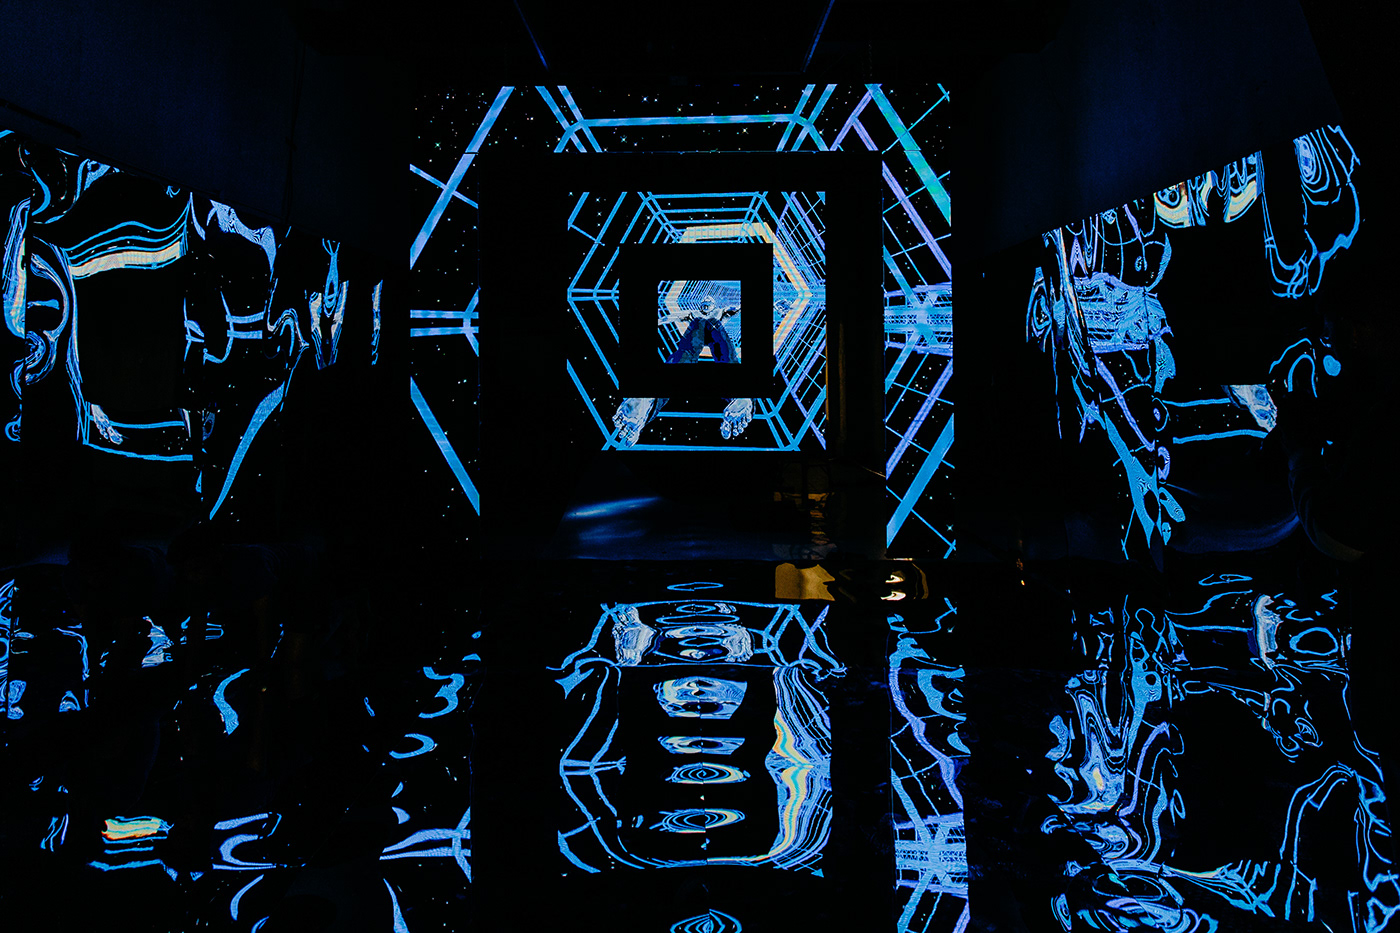 LED installation light installation motion graphic projection mapping